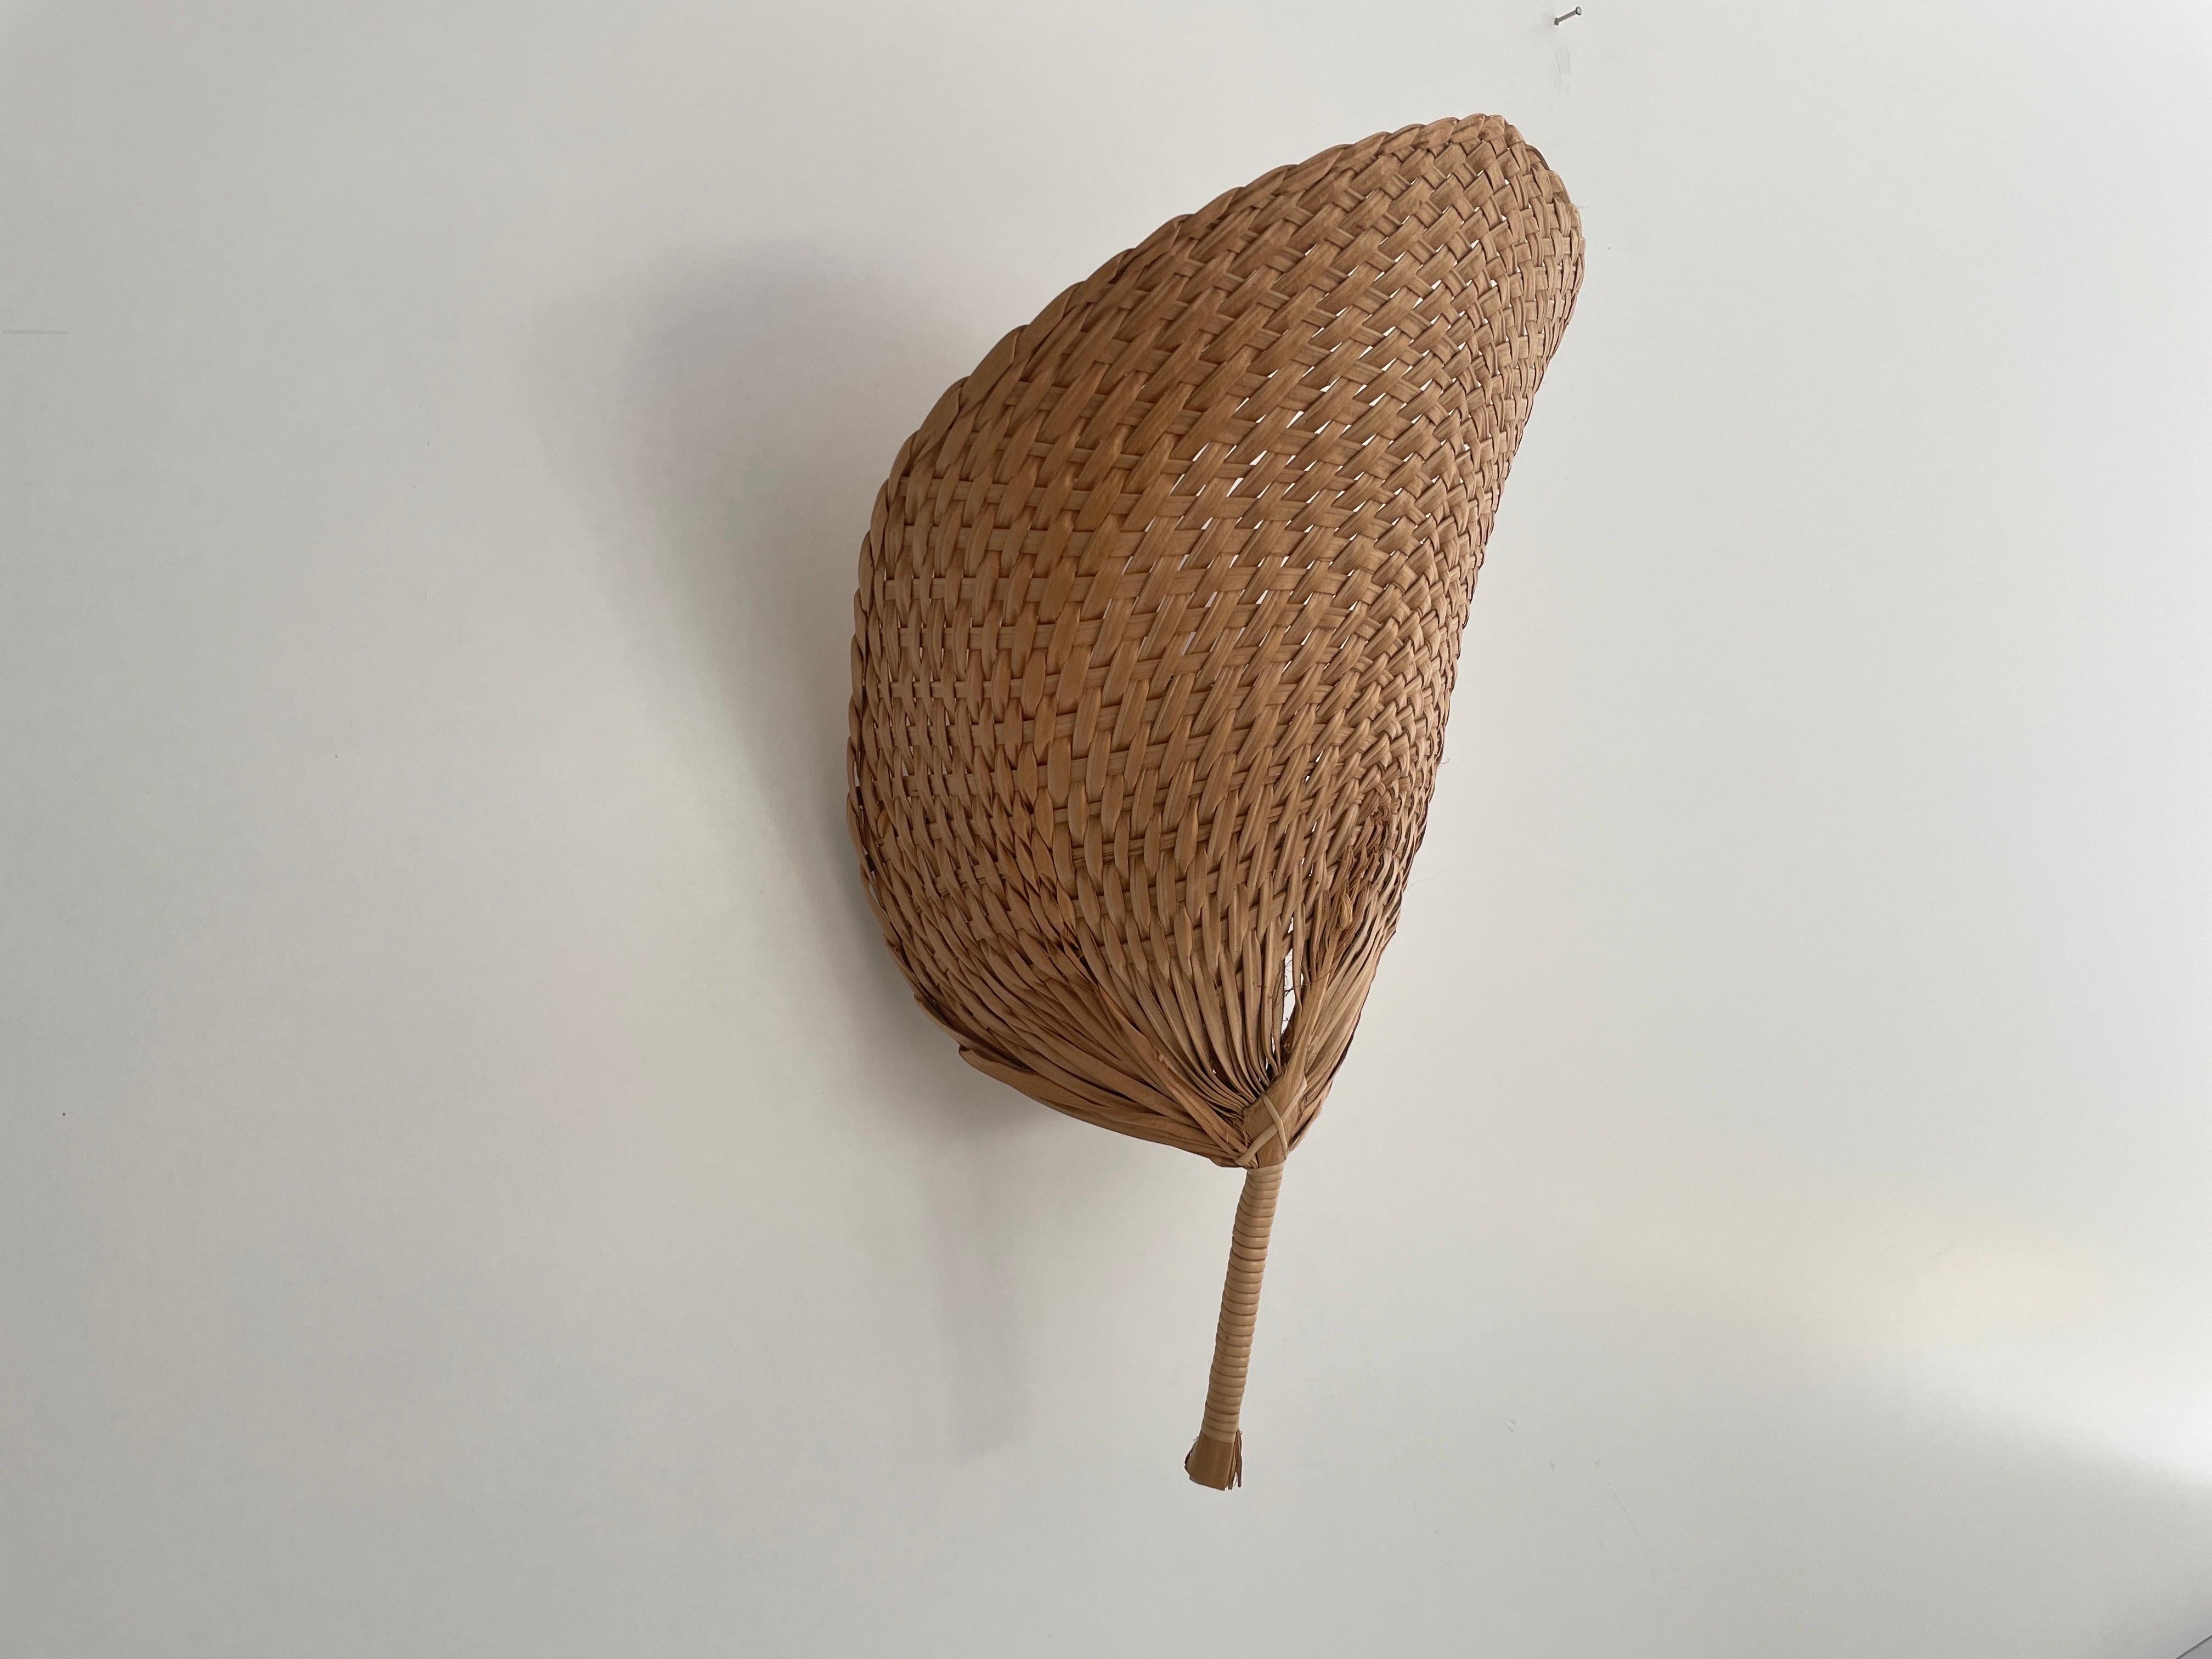 Hand-woven Wicker Palmate Leaf Design Single Sconce, 1960s, Germany For Sale 1